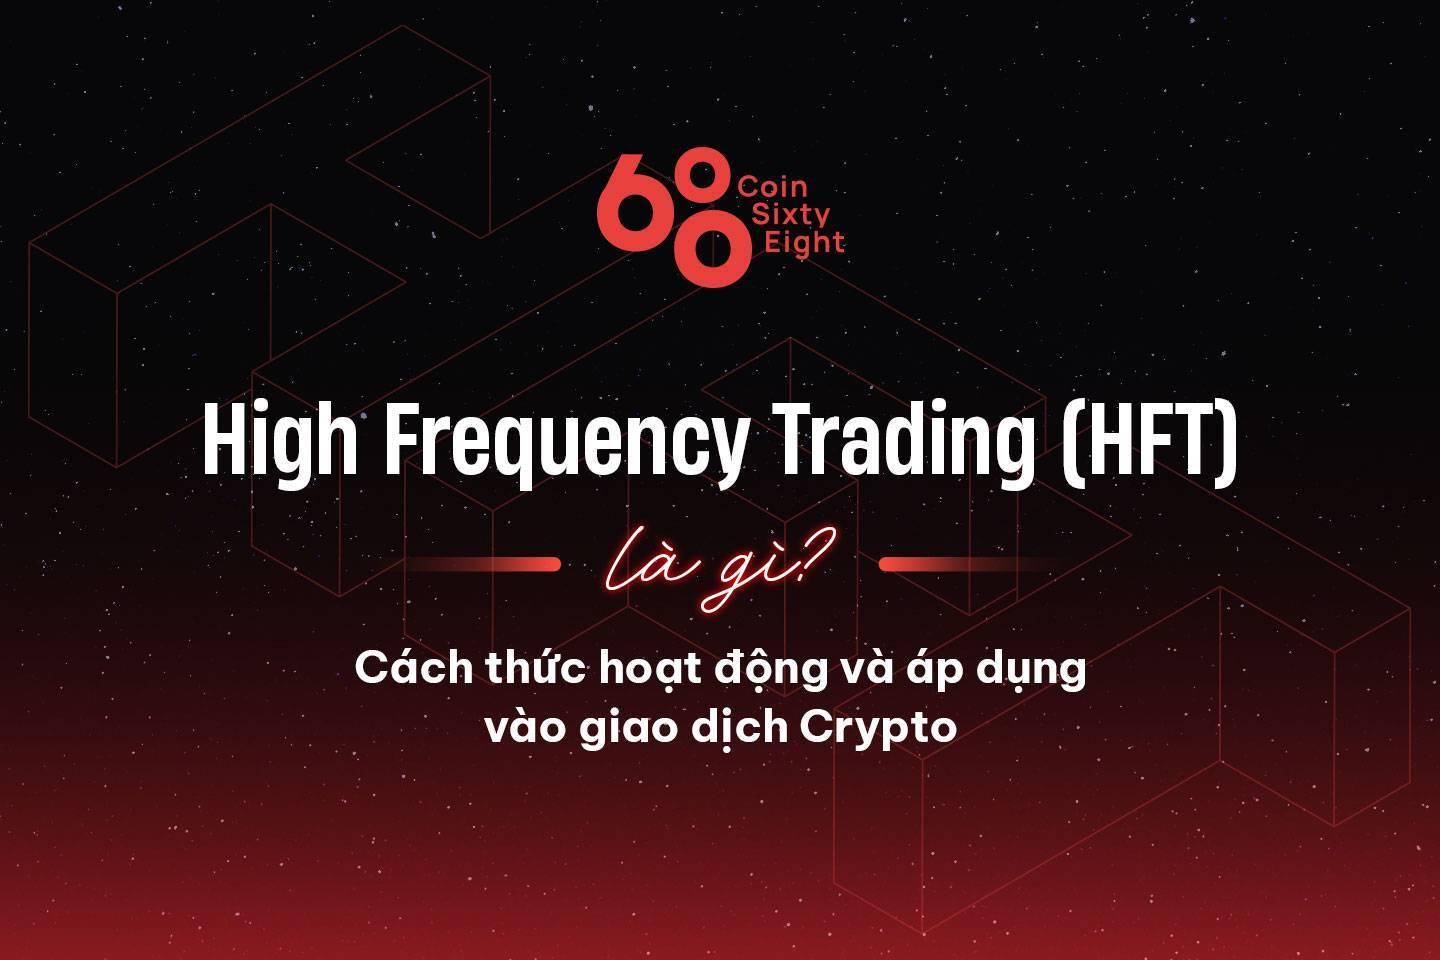 high-frequency-trading-hft-la-gi-cach-thuc-hoat-dong-va-ap-dung-vao-giao-dich-crypto